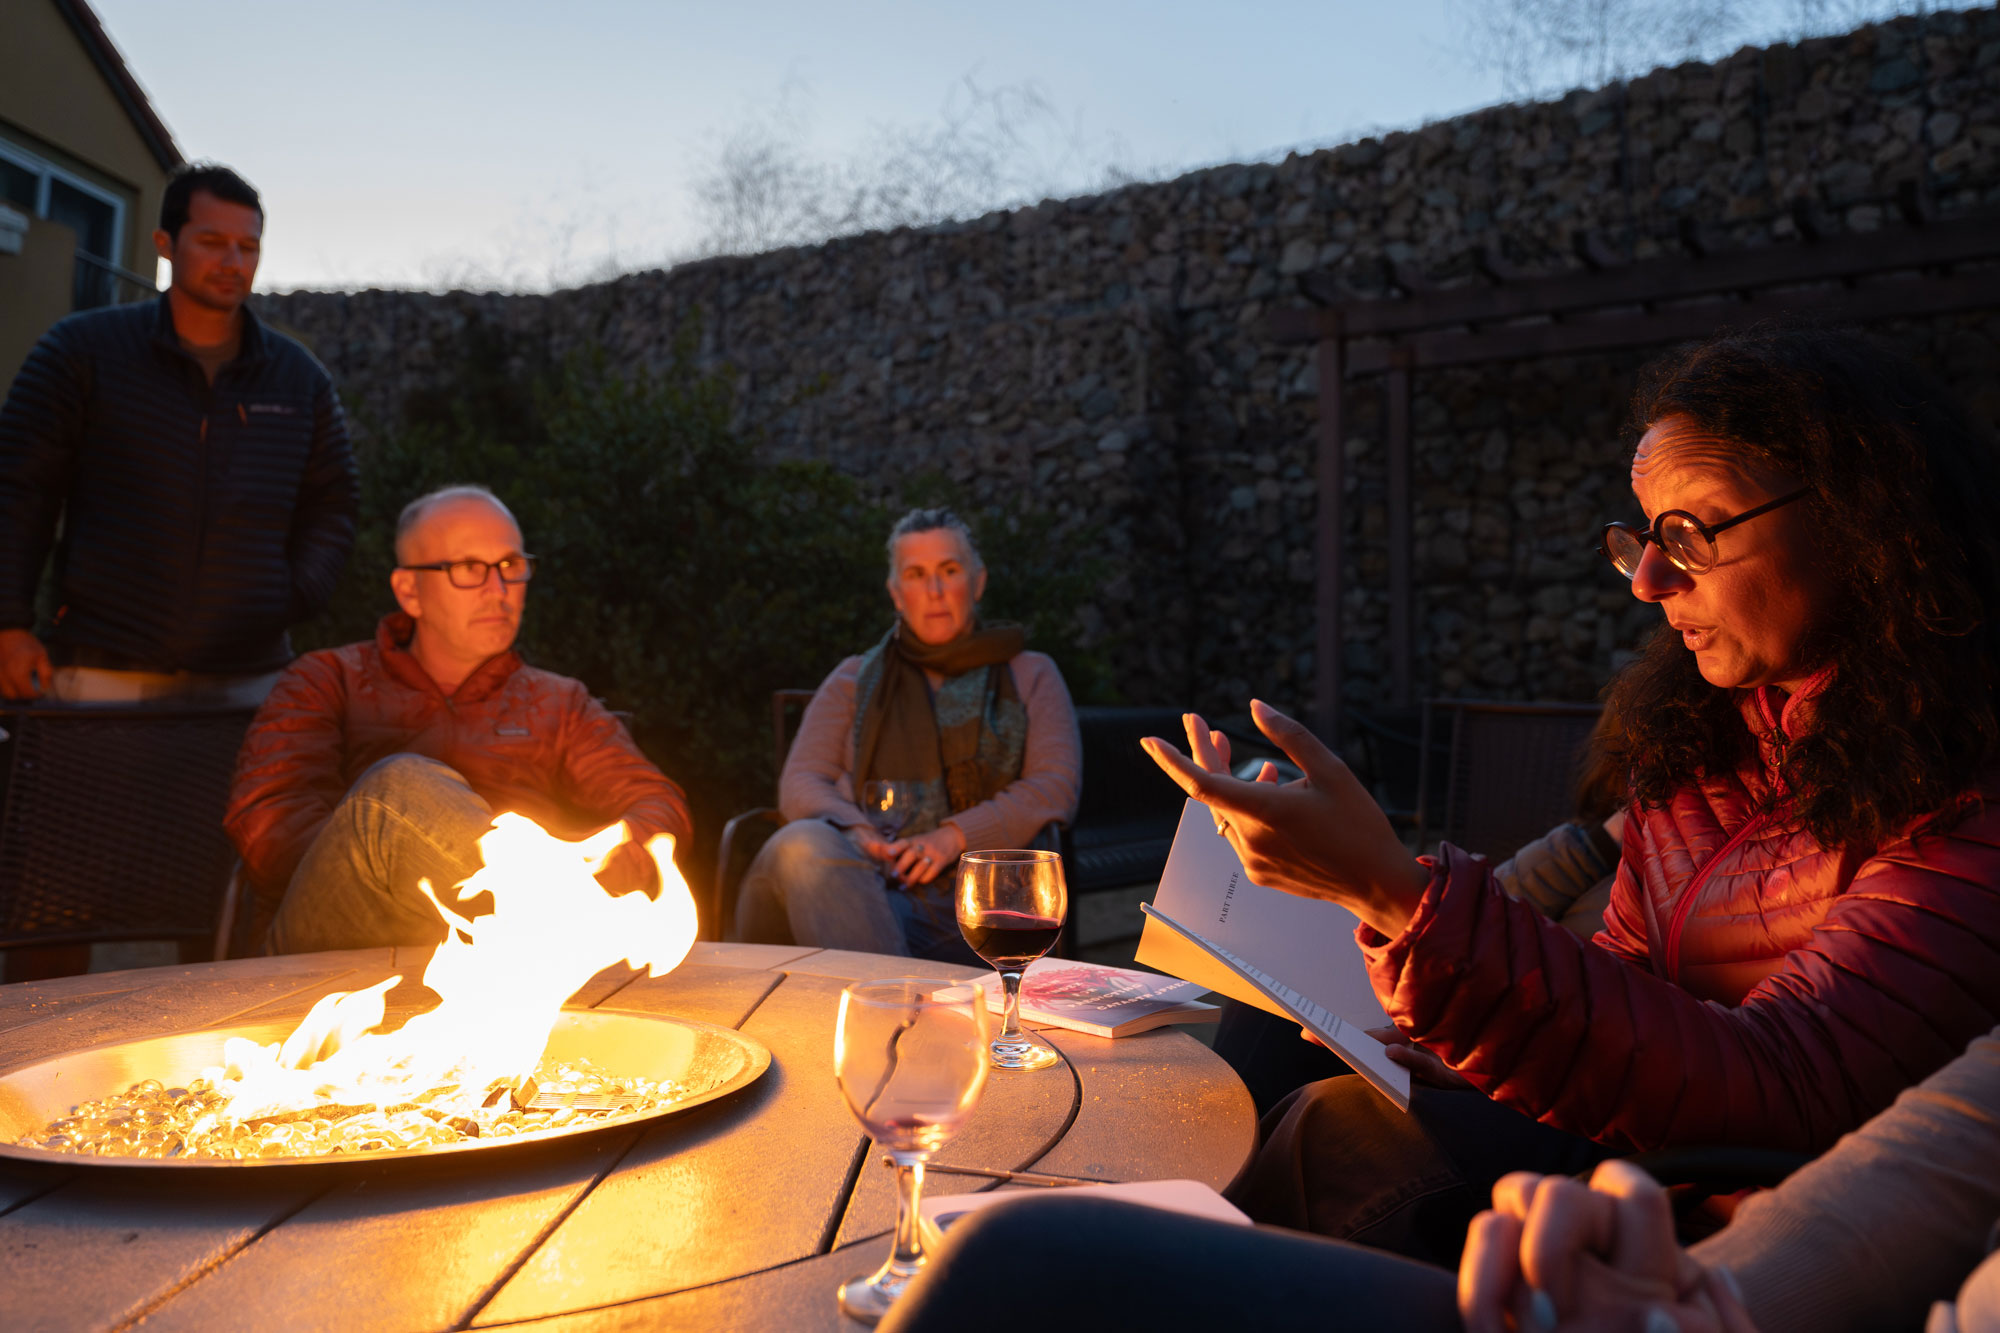 a woman wearing glasses gestures with her hand as she reads a book of poetry to colleagues around a campfire